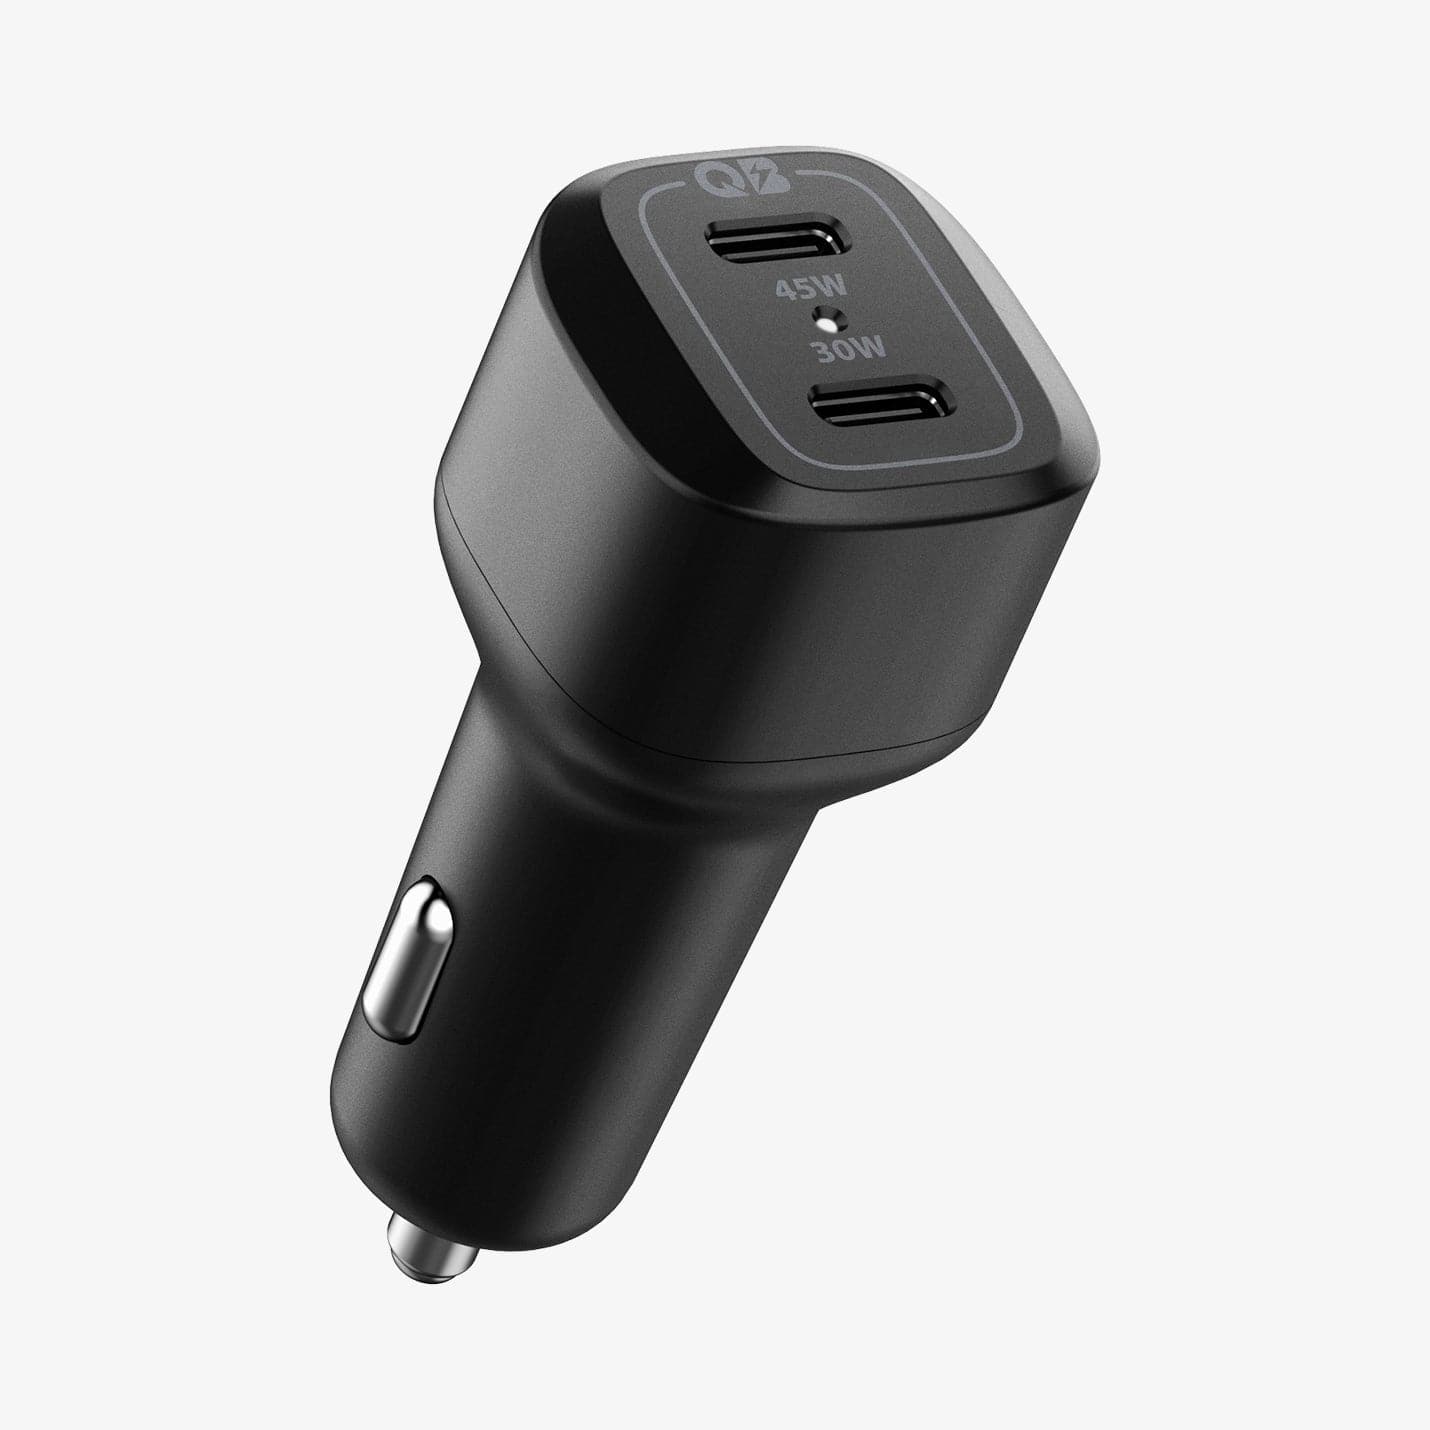 ACP04581 - ArcStation™ Car Charger PC2200 showing the top, side and bottom